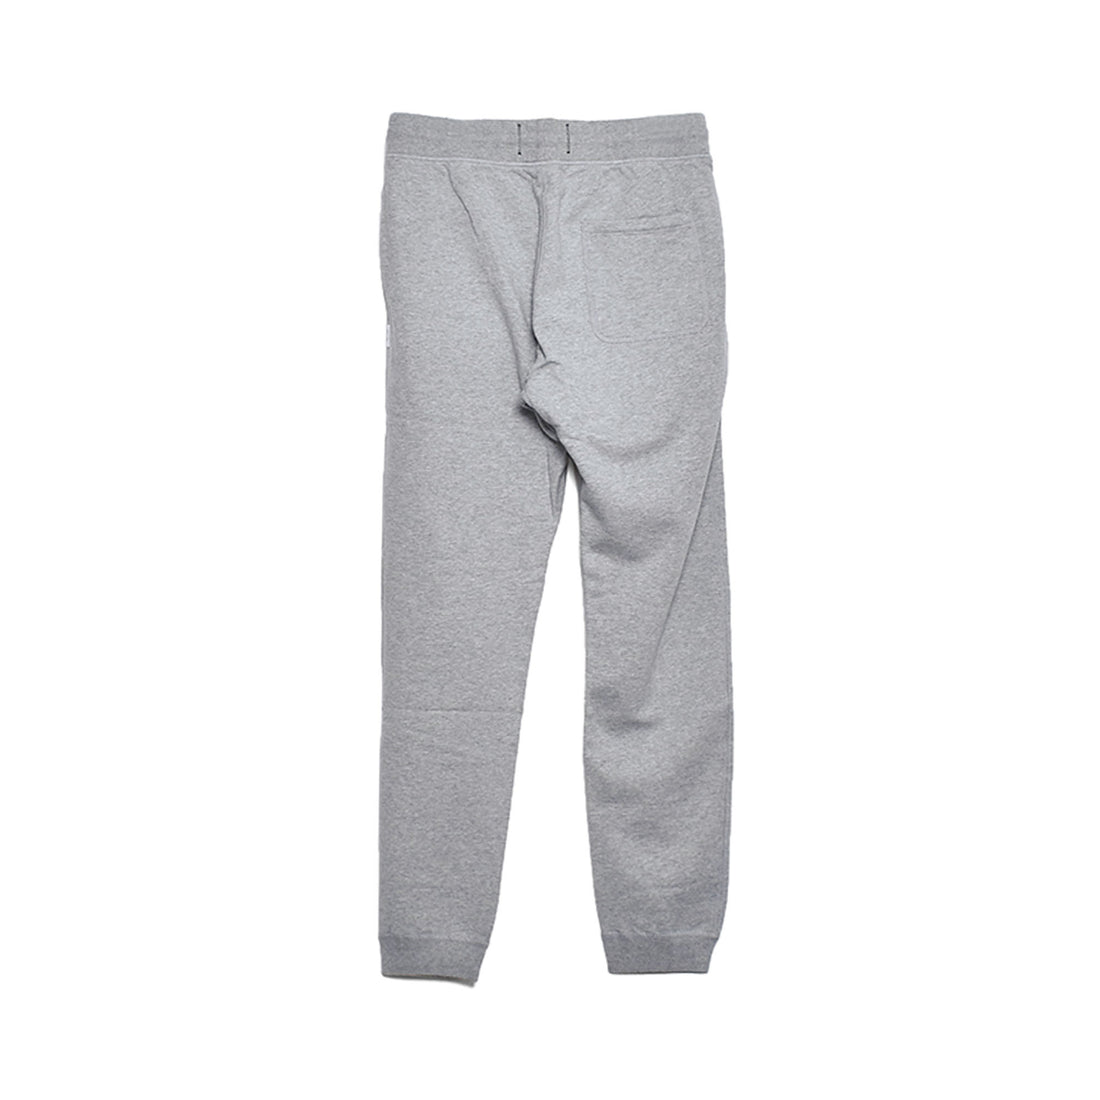 [REIGNING CHAMP]MIDWEIGHT TERRY SLIM SWEATPANT/HATHER GRAY(RC-5075)